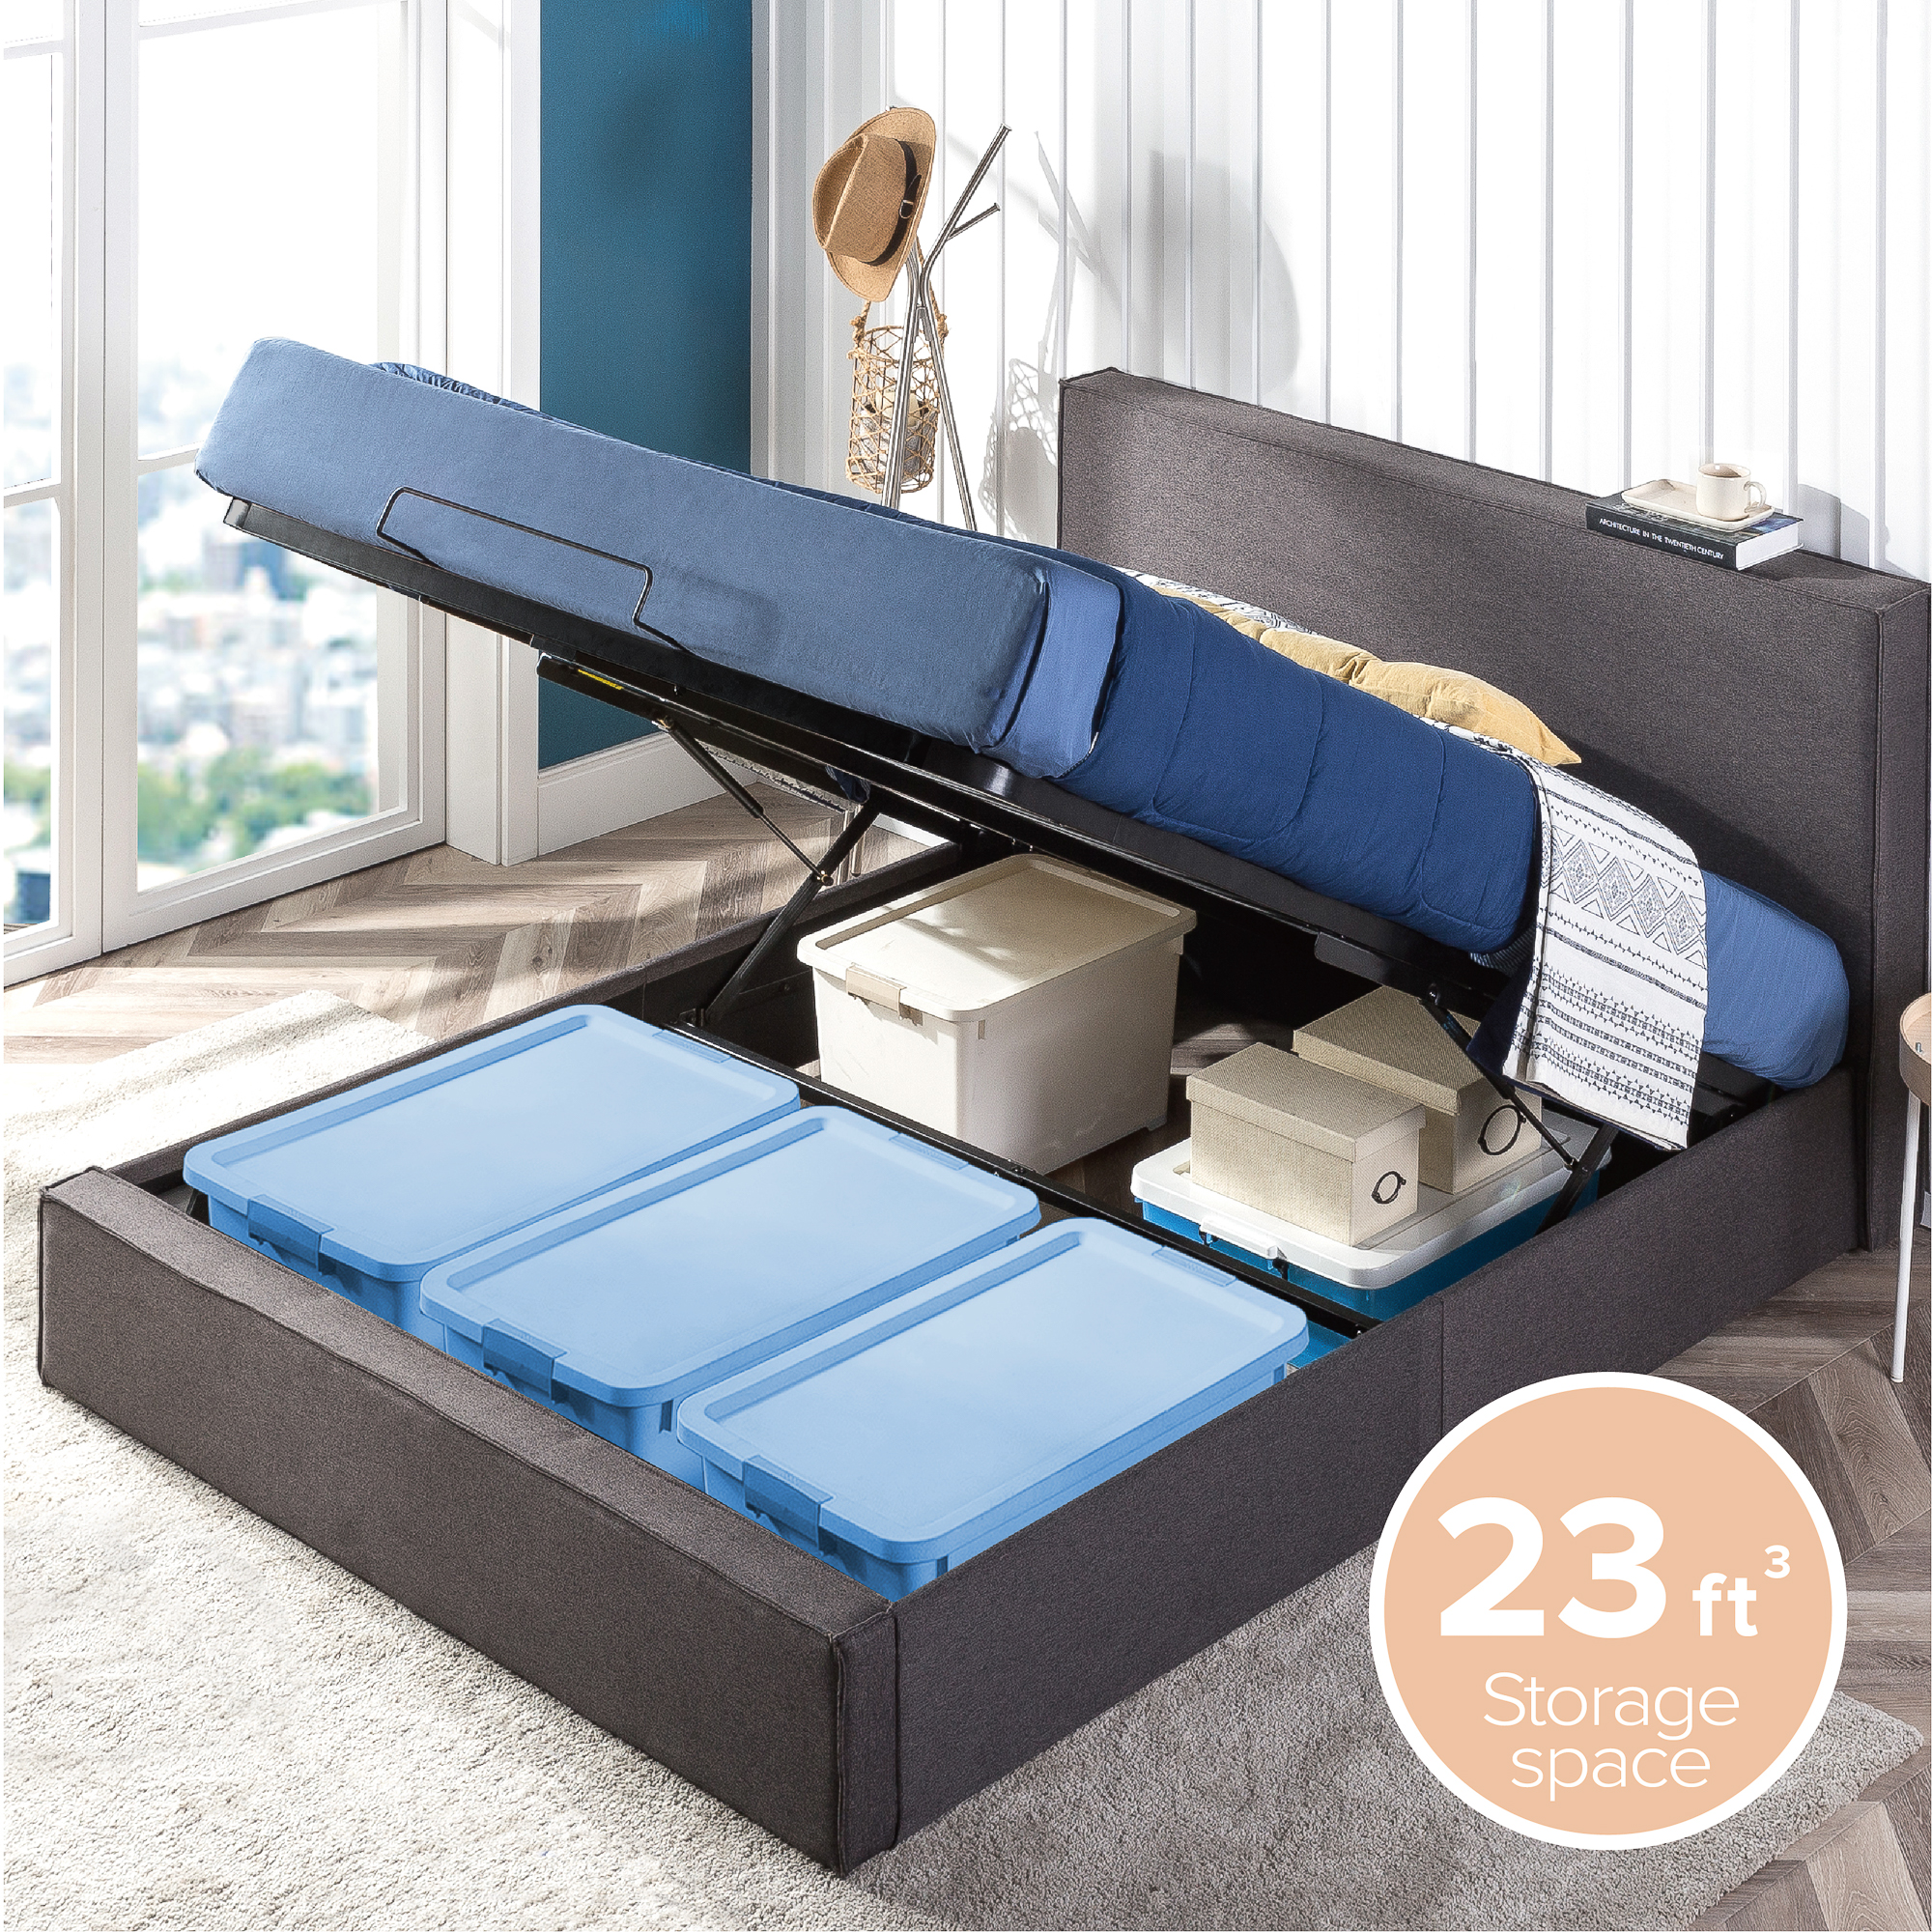 Zinus Finley 34" Upholstered Platform Bed with Lifting Storage, Full - image 1 of 11